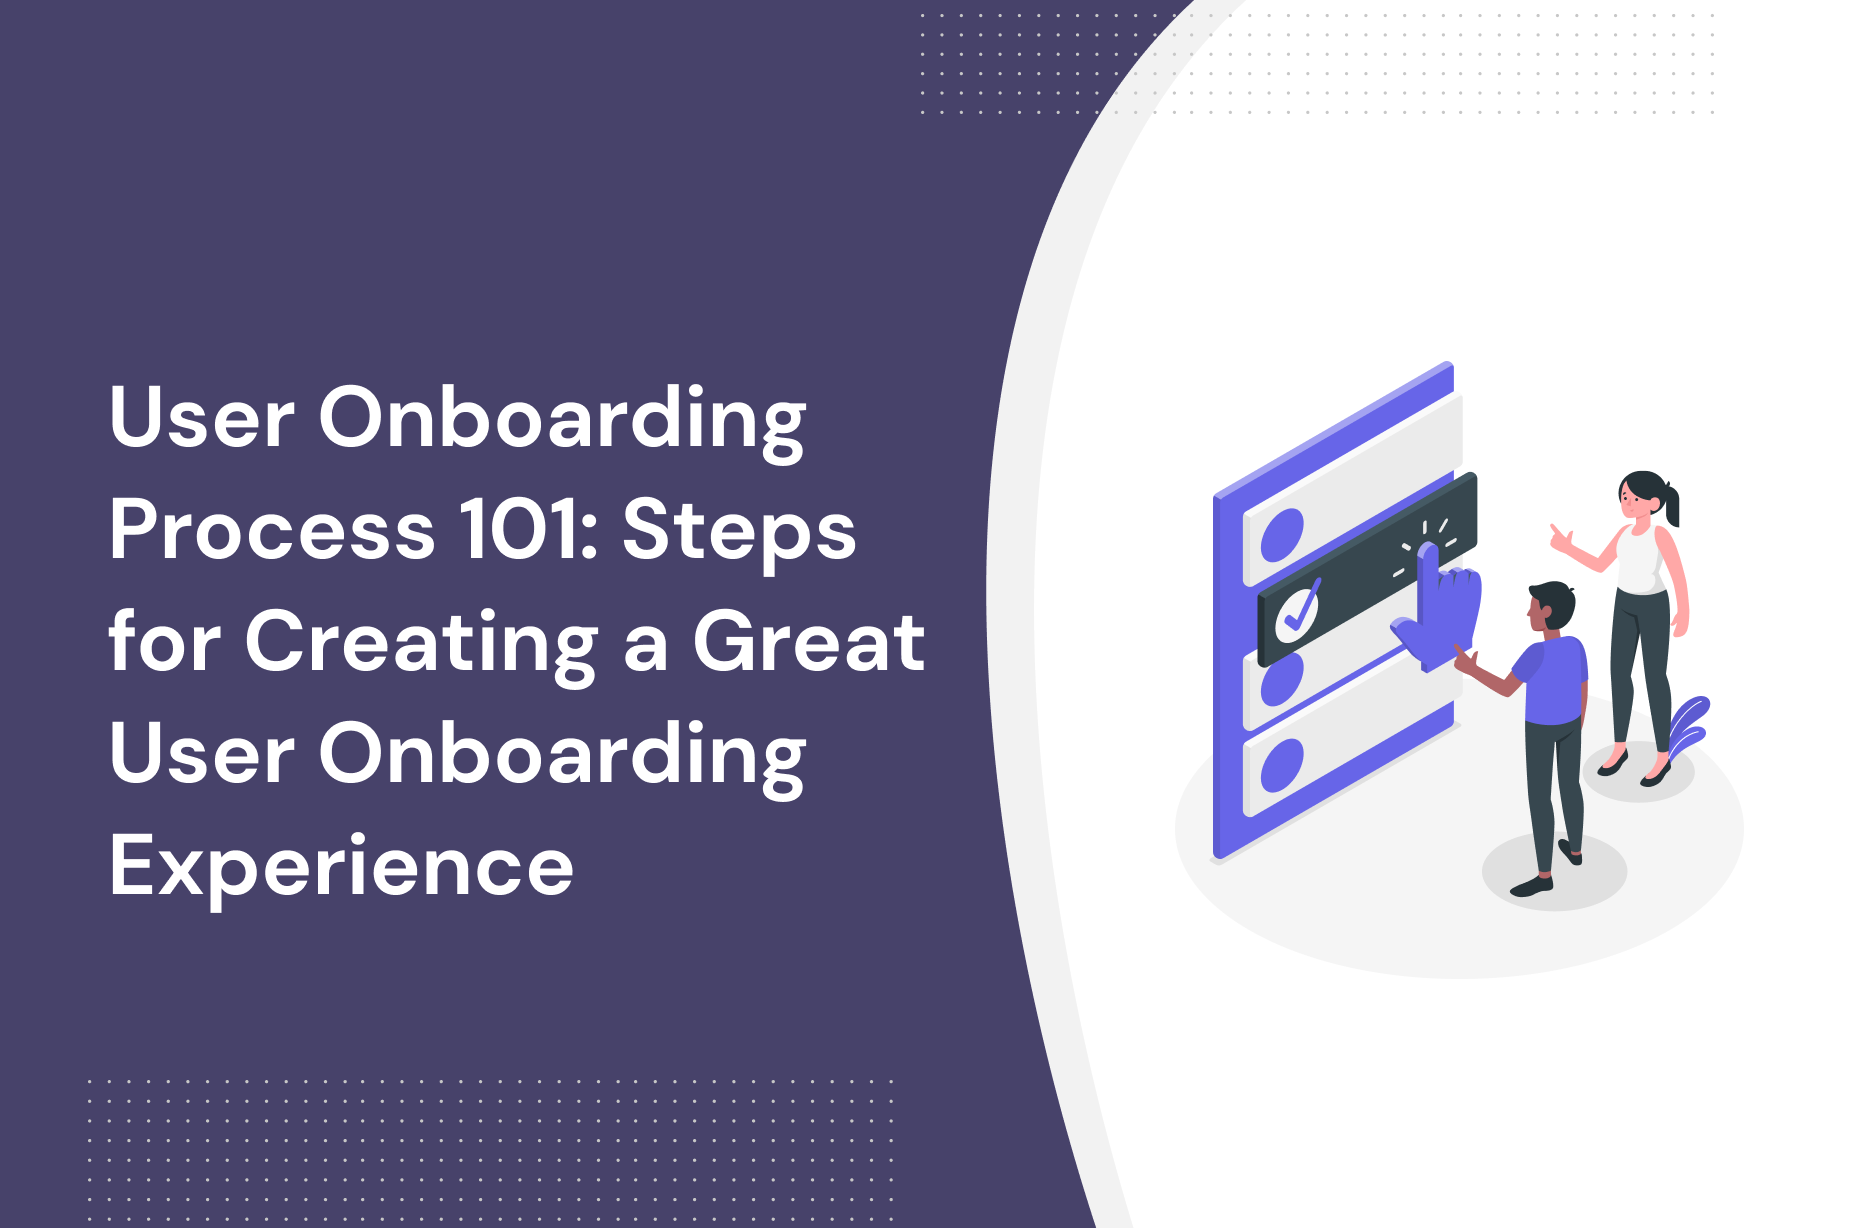 User Onboarding Process 101: Steps for Creating a Great User Onboarding Experience